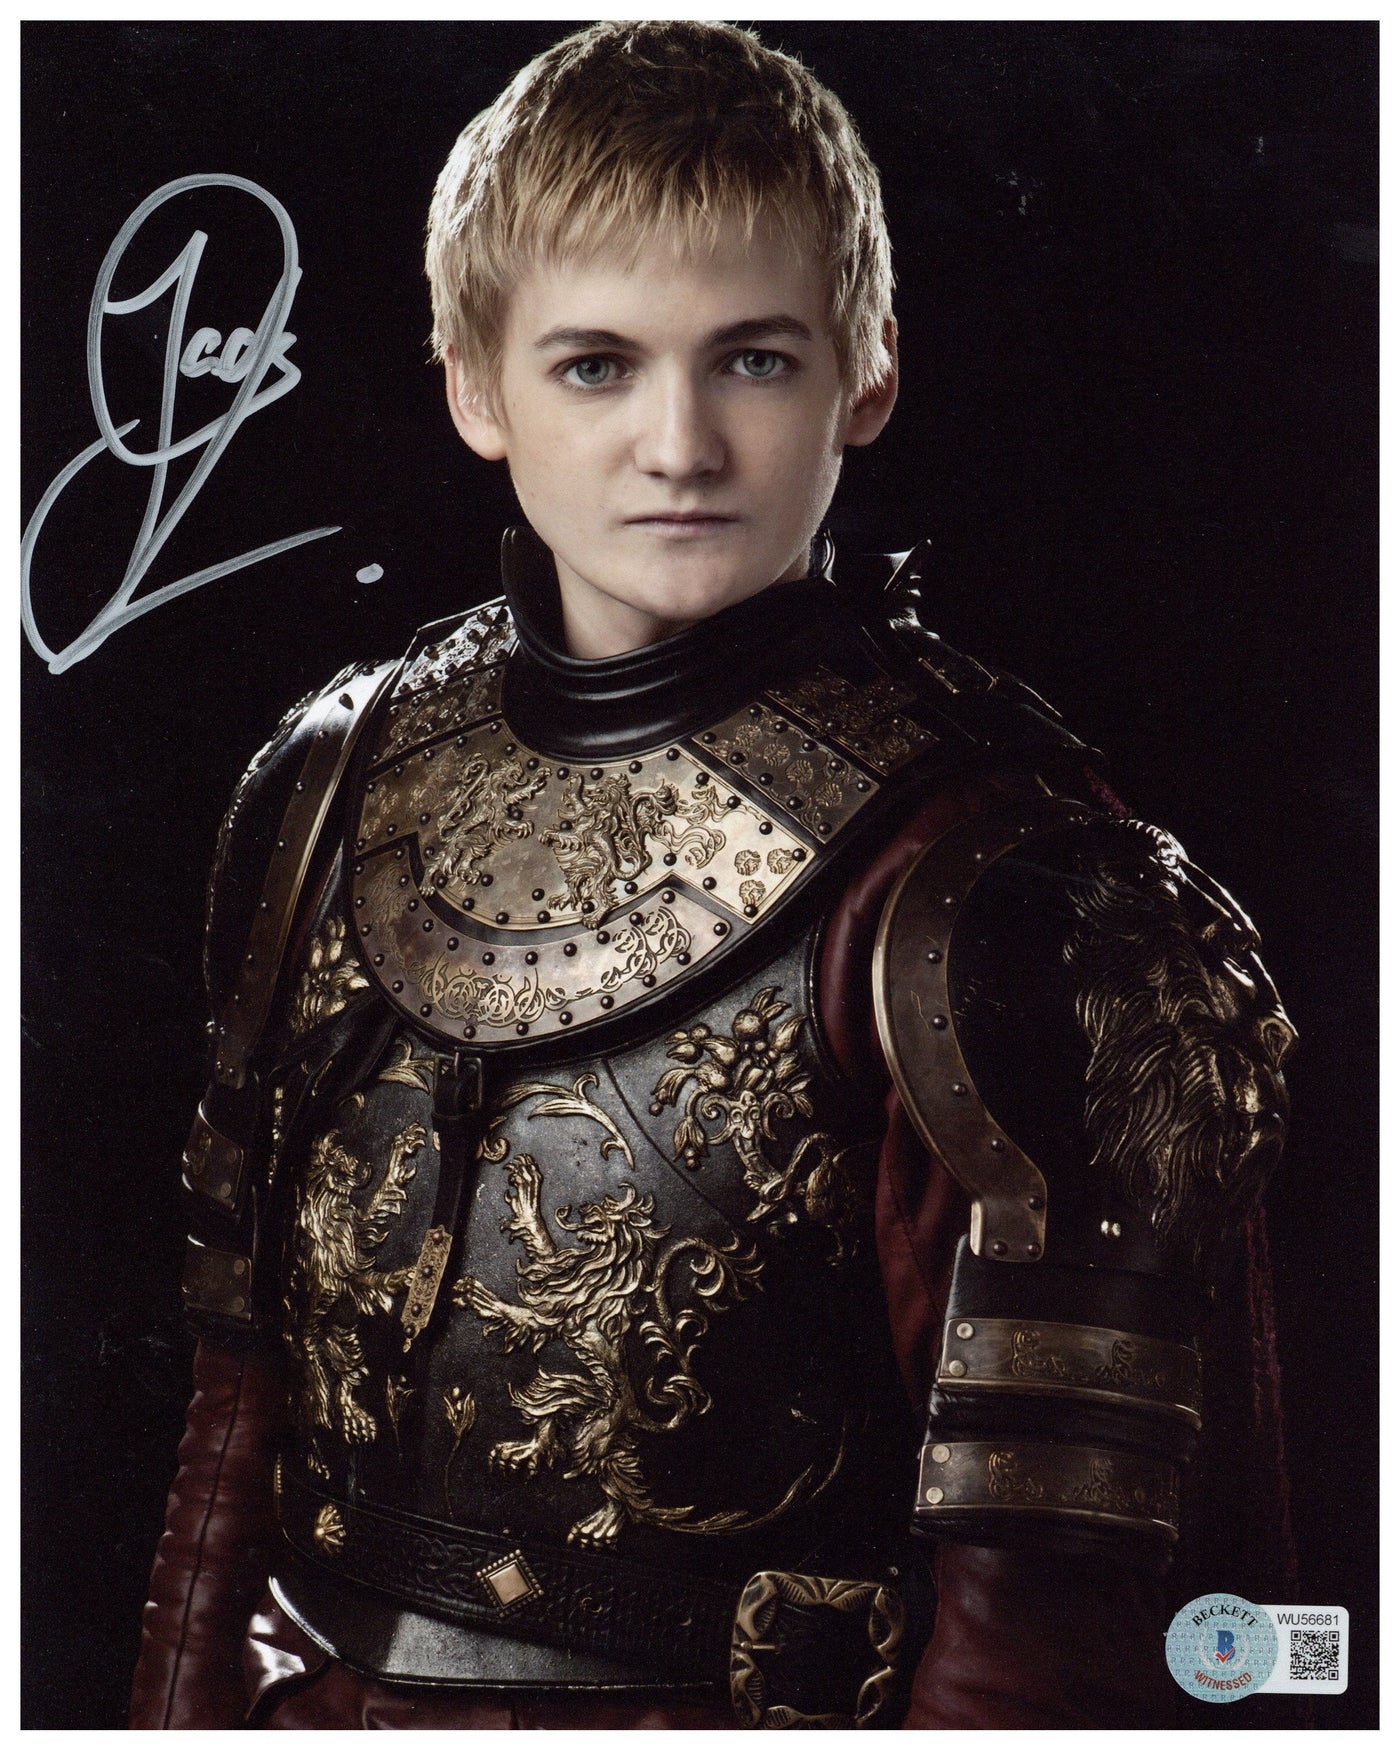 JACK GLEESON SIGNED 8X10 PHOTO GAME OF THRONES JOFFREY AUTOGRAPHED BAS 6